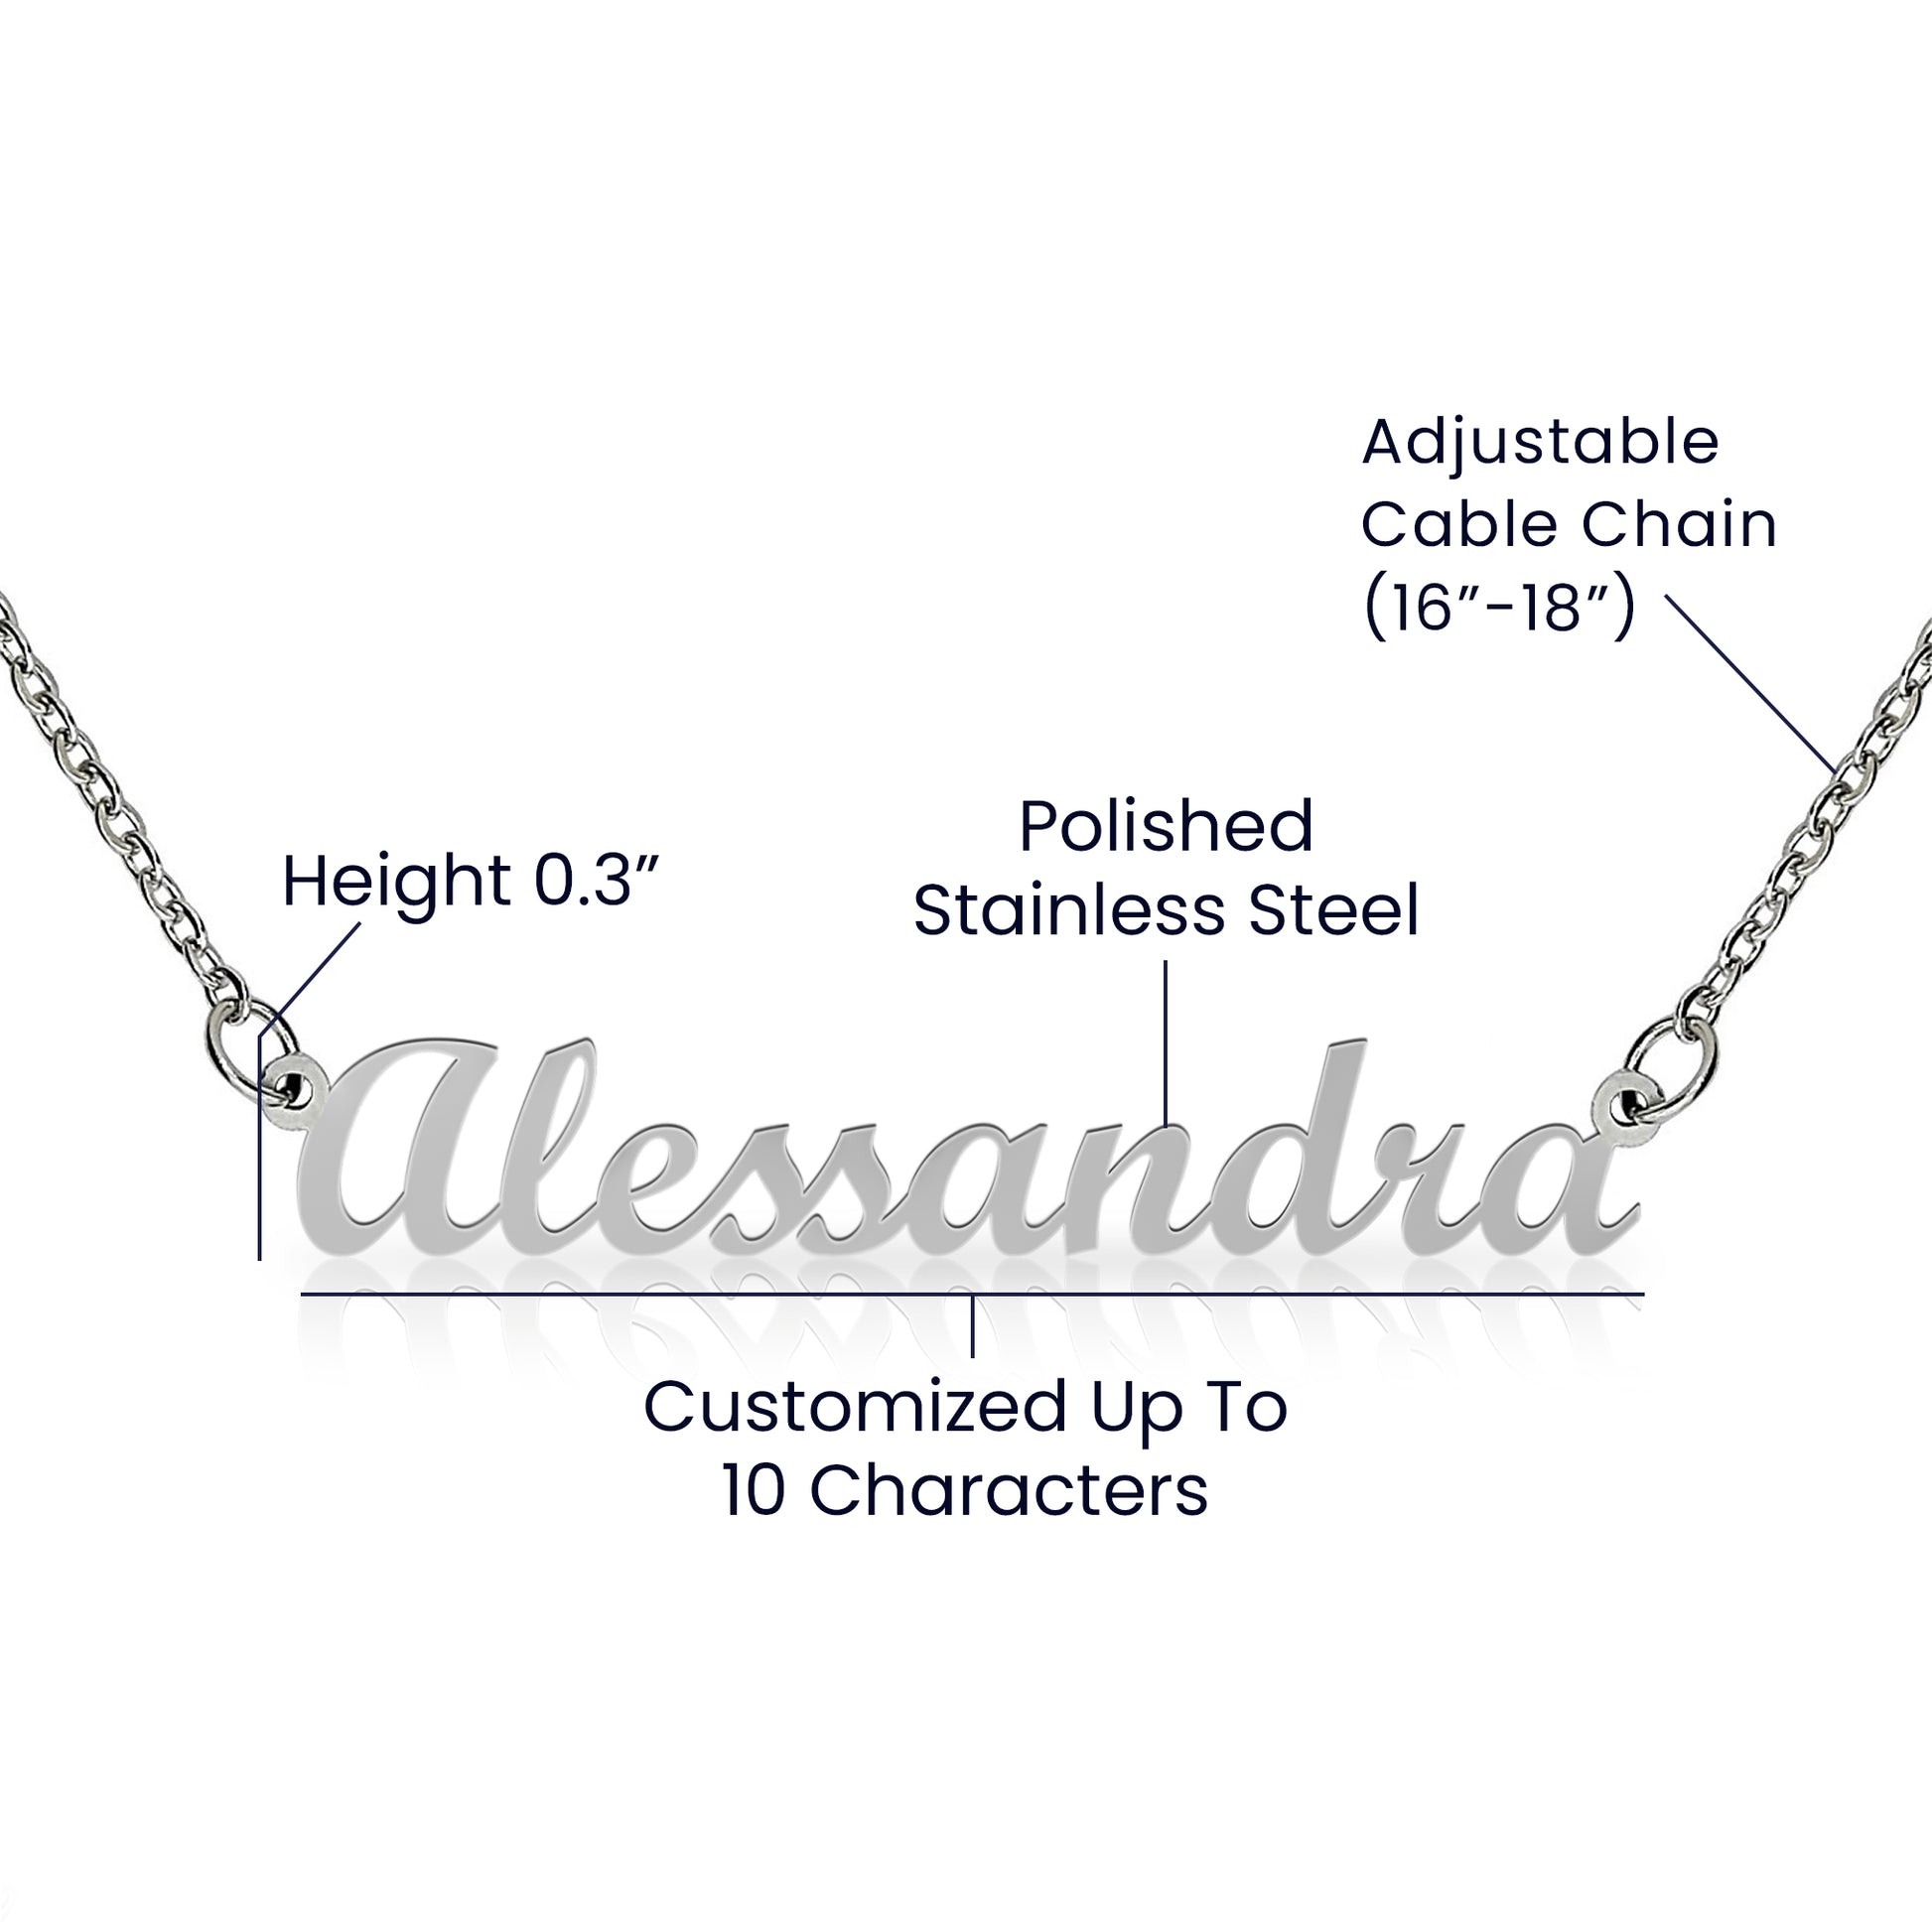 To My Daughter - Raising You Custom Name Necklace